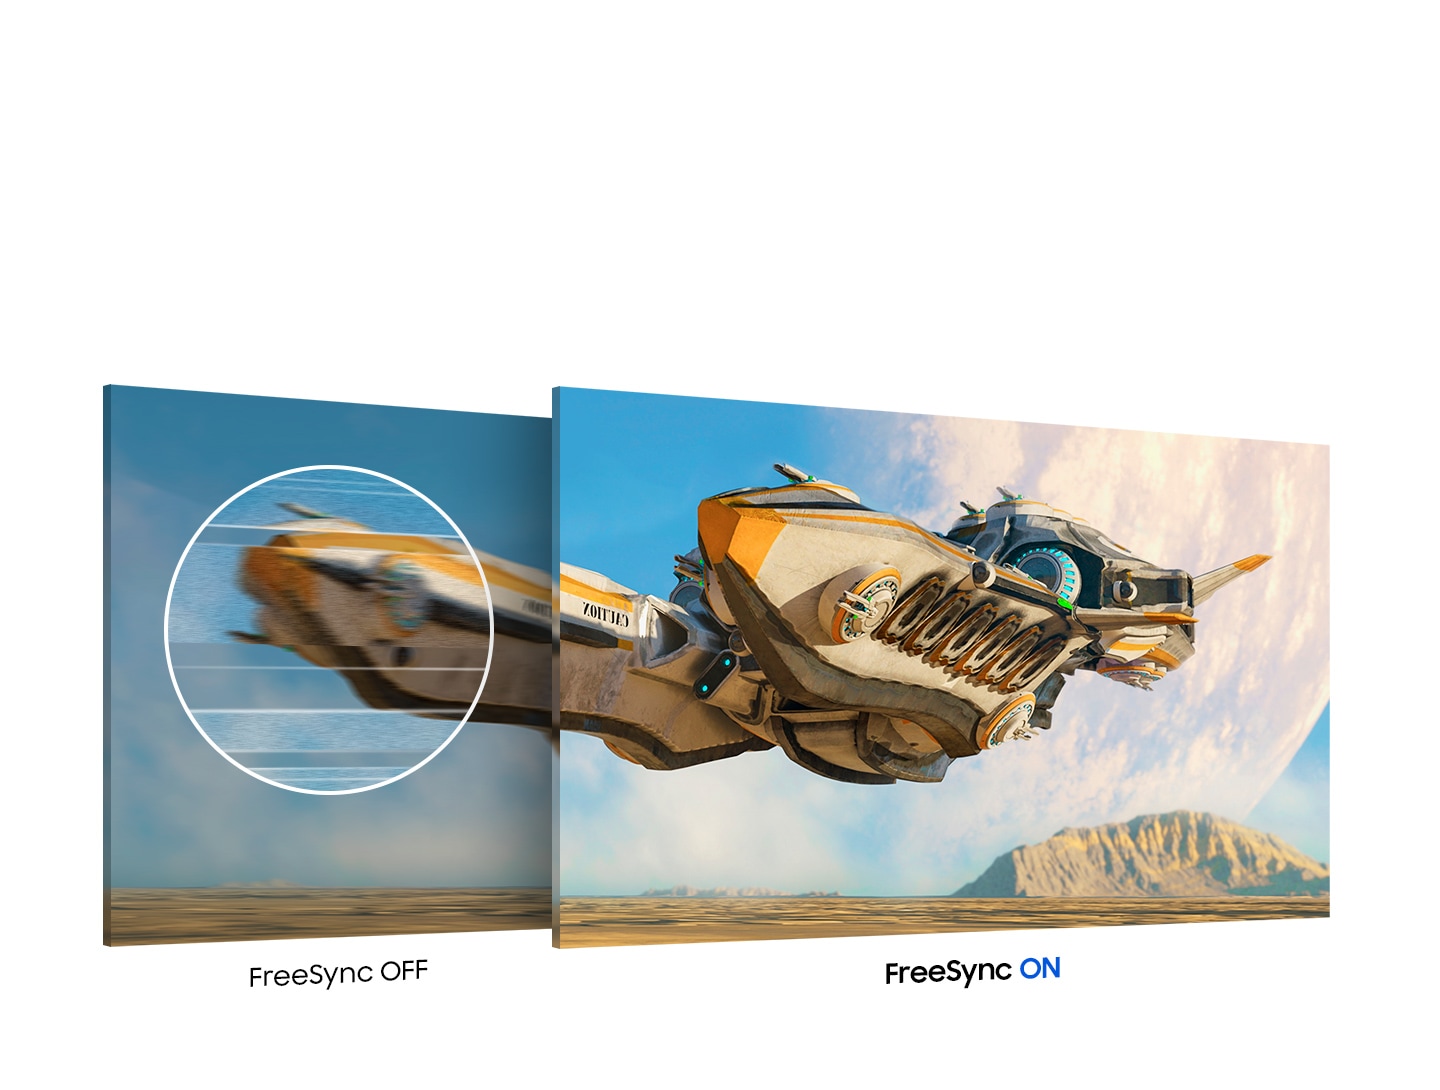 There is a spaceship, and the left side of it is torn as FreeSync is off. The right side of it looks smooth, as the FreeSync is on.